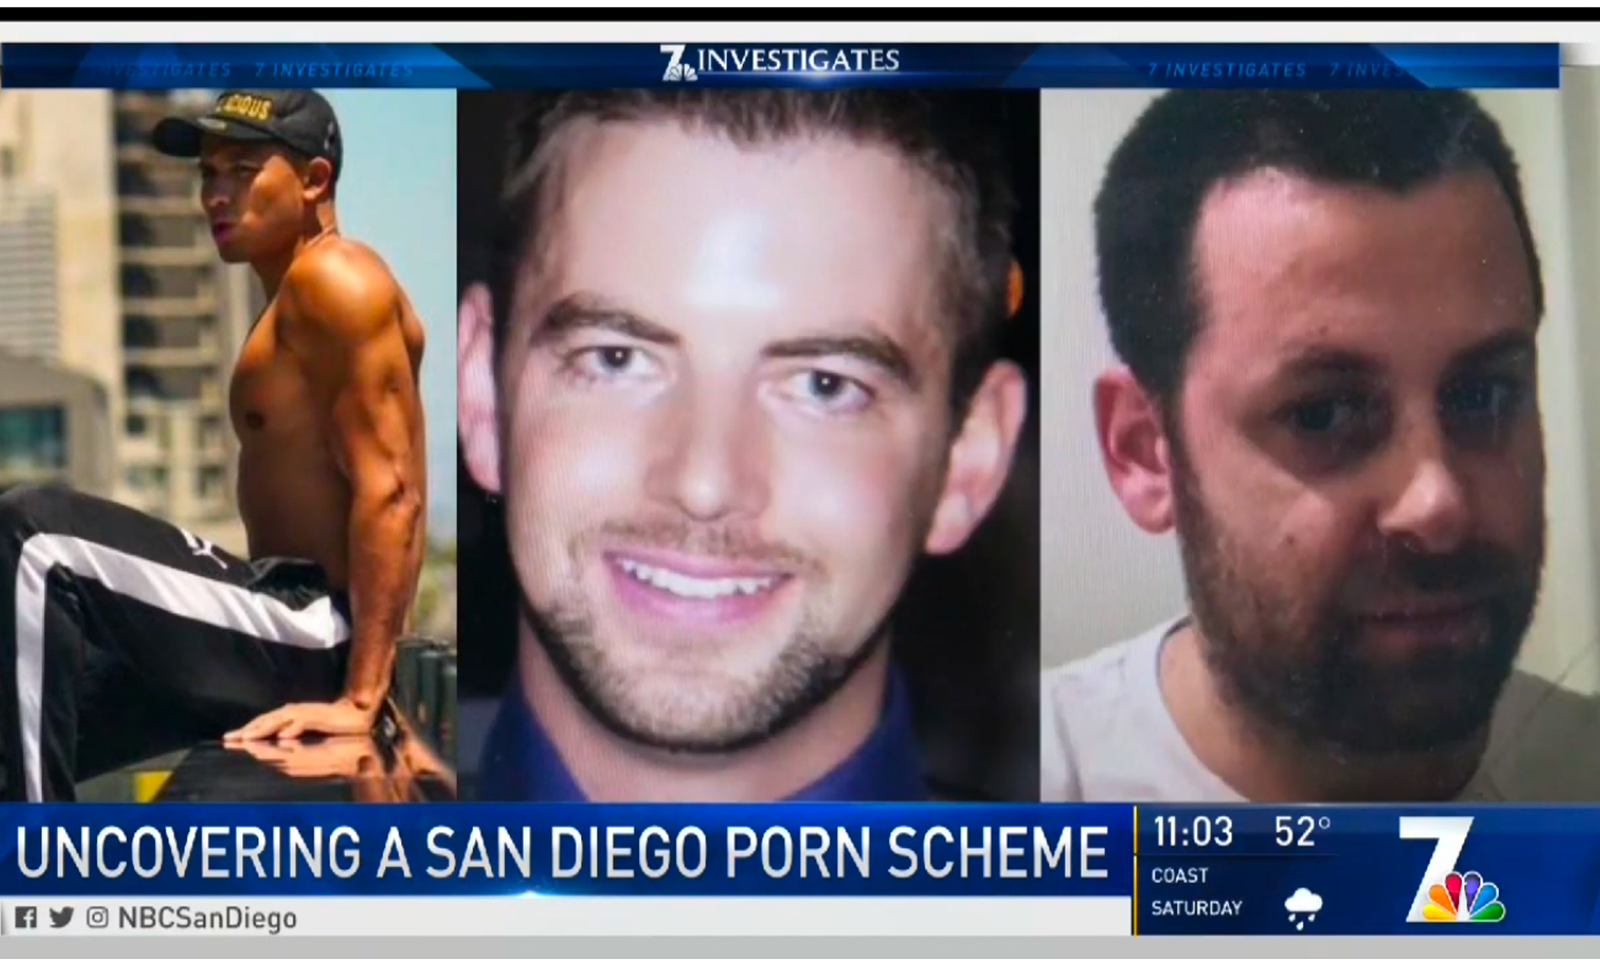 GirlsDoPorn Videographer Testifies He Lied to Models pic image